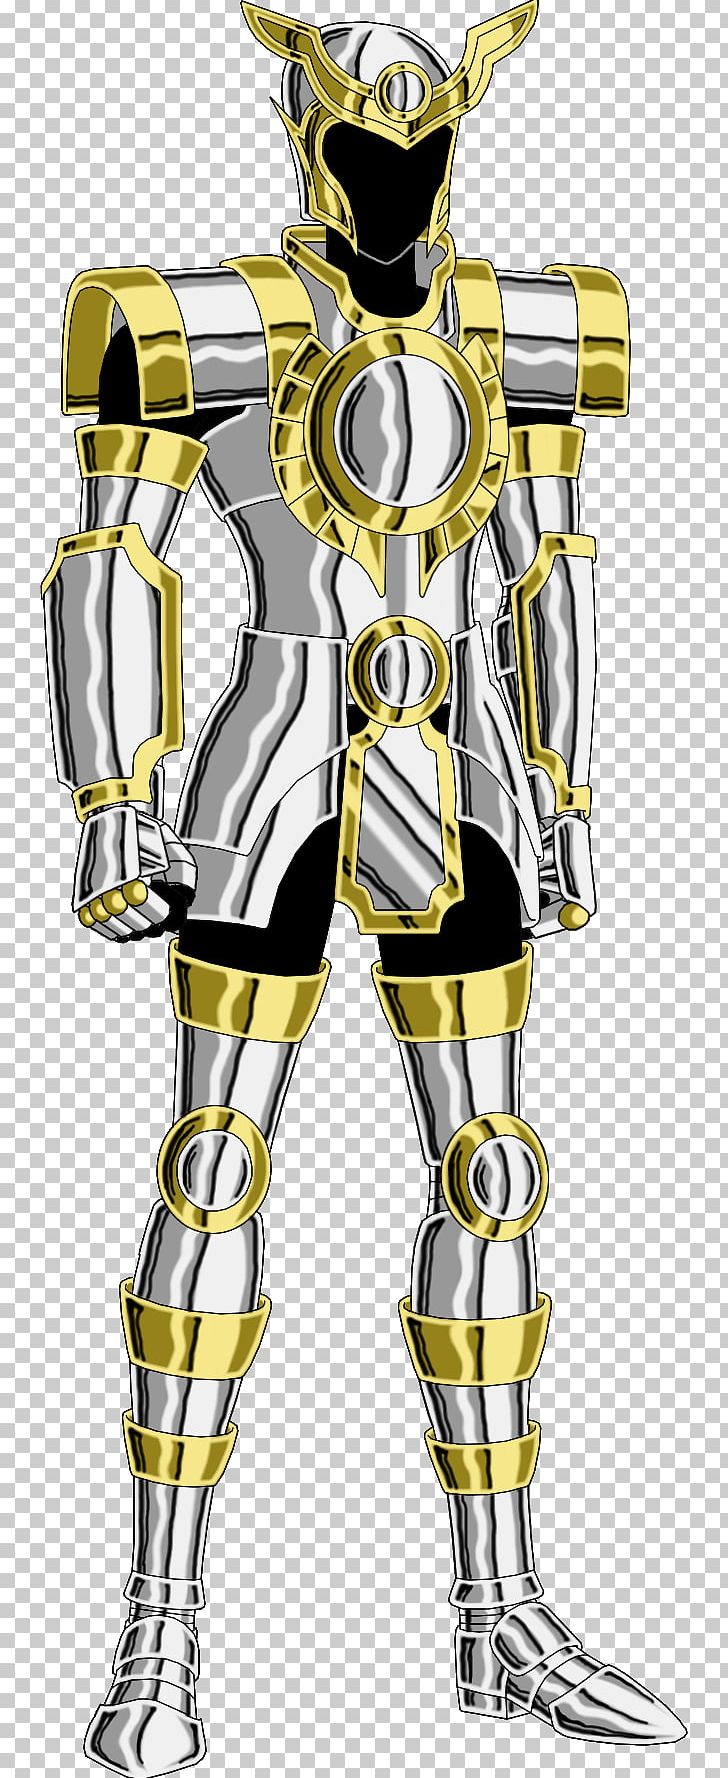 Cartoon Armour Character Fiction PNG, Clipart, Armour, Cartoon, Character, Costume Design, Fiction Free PNG Download